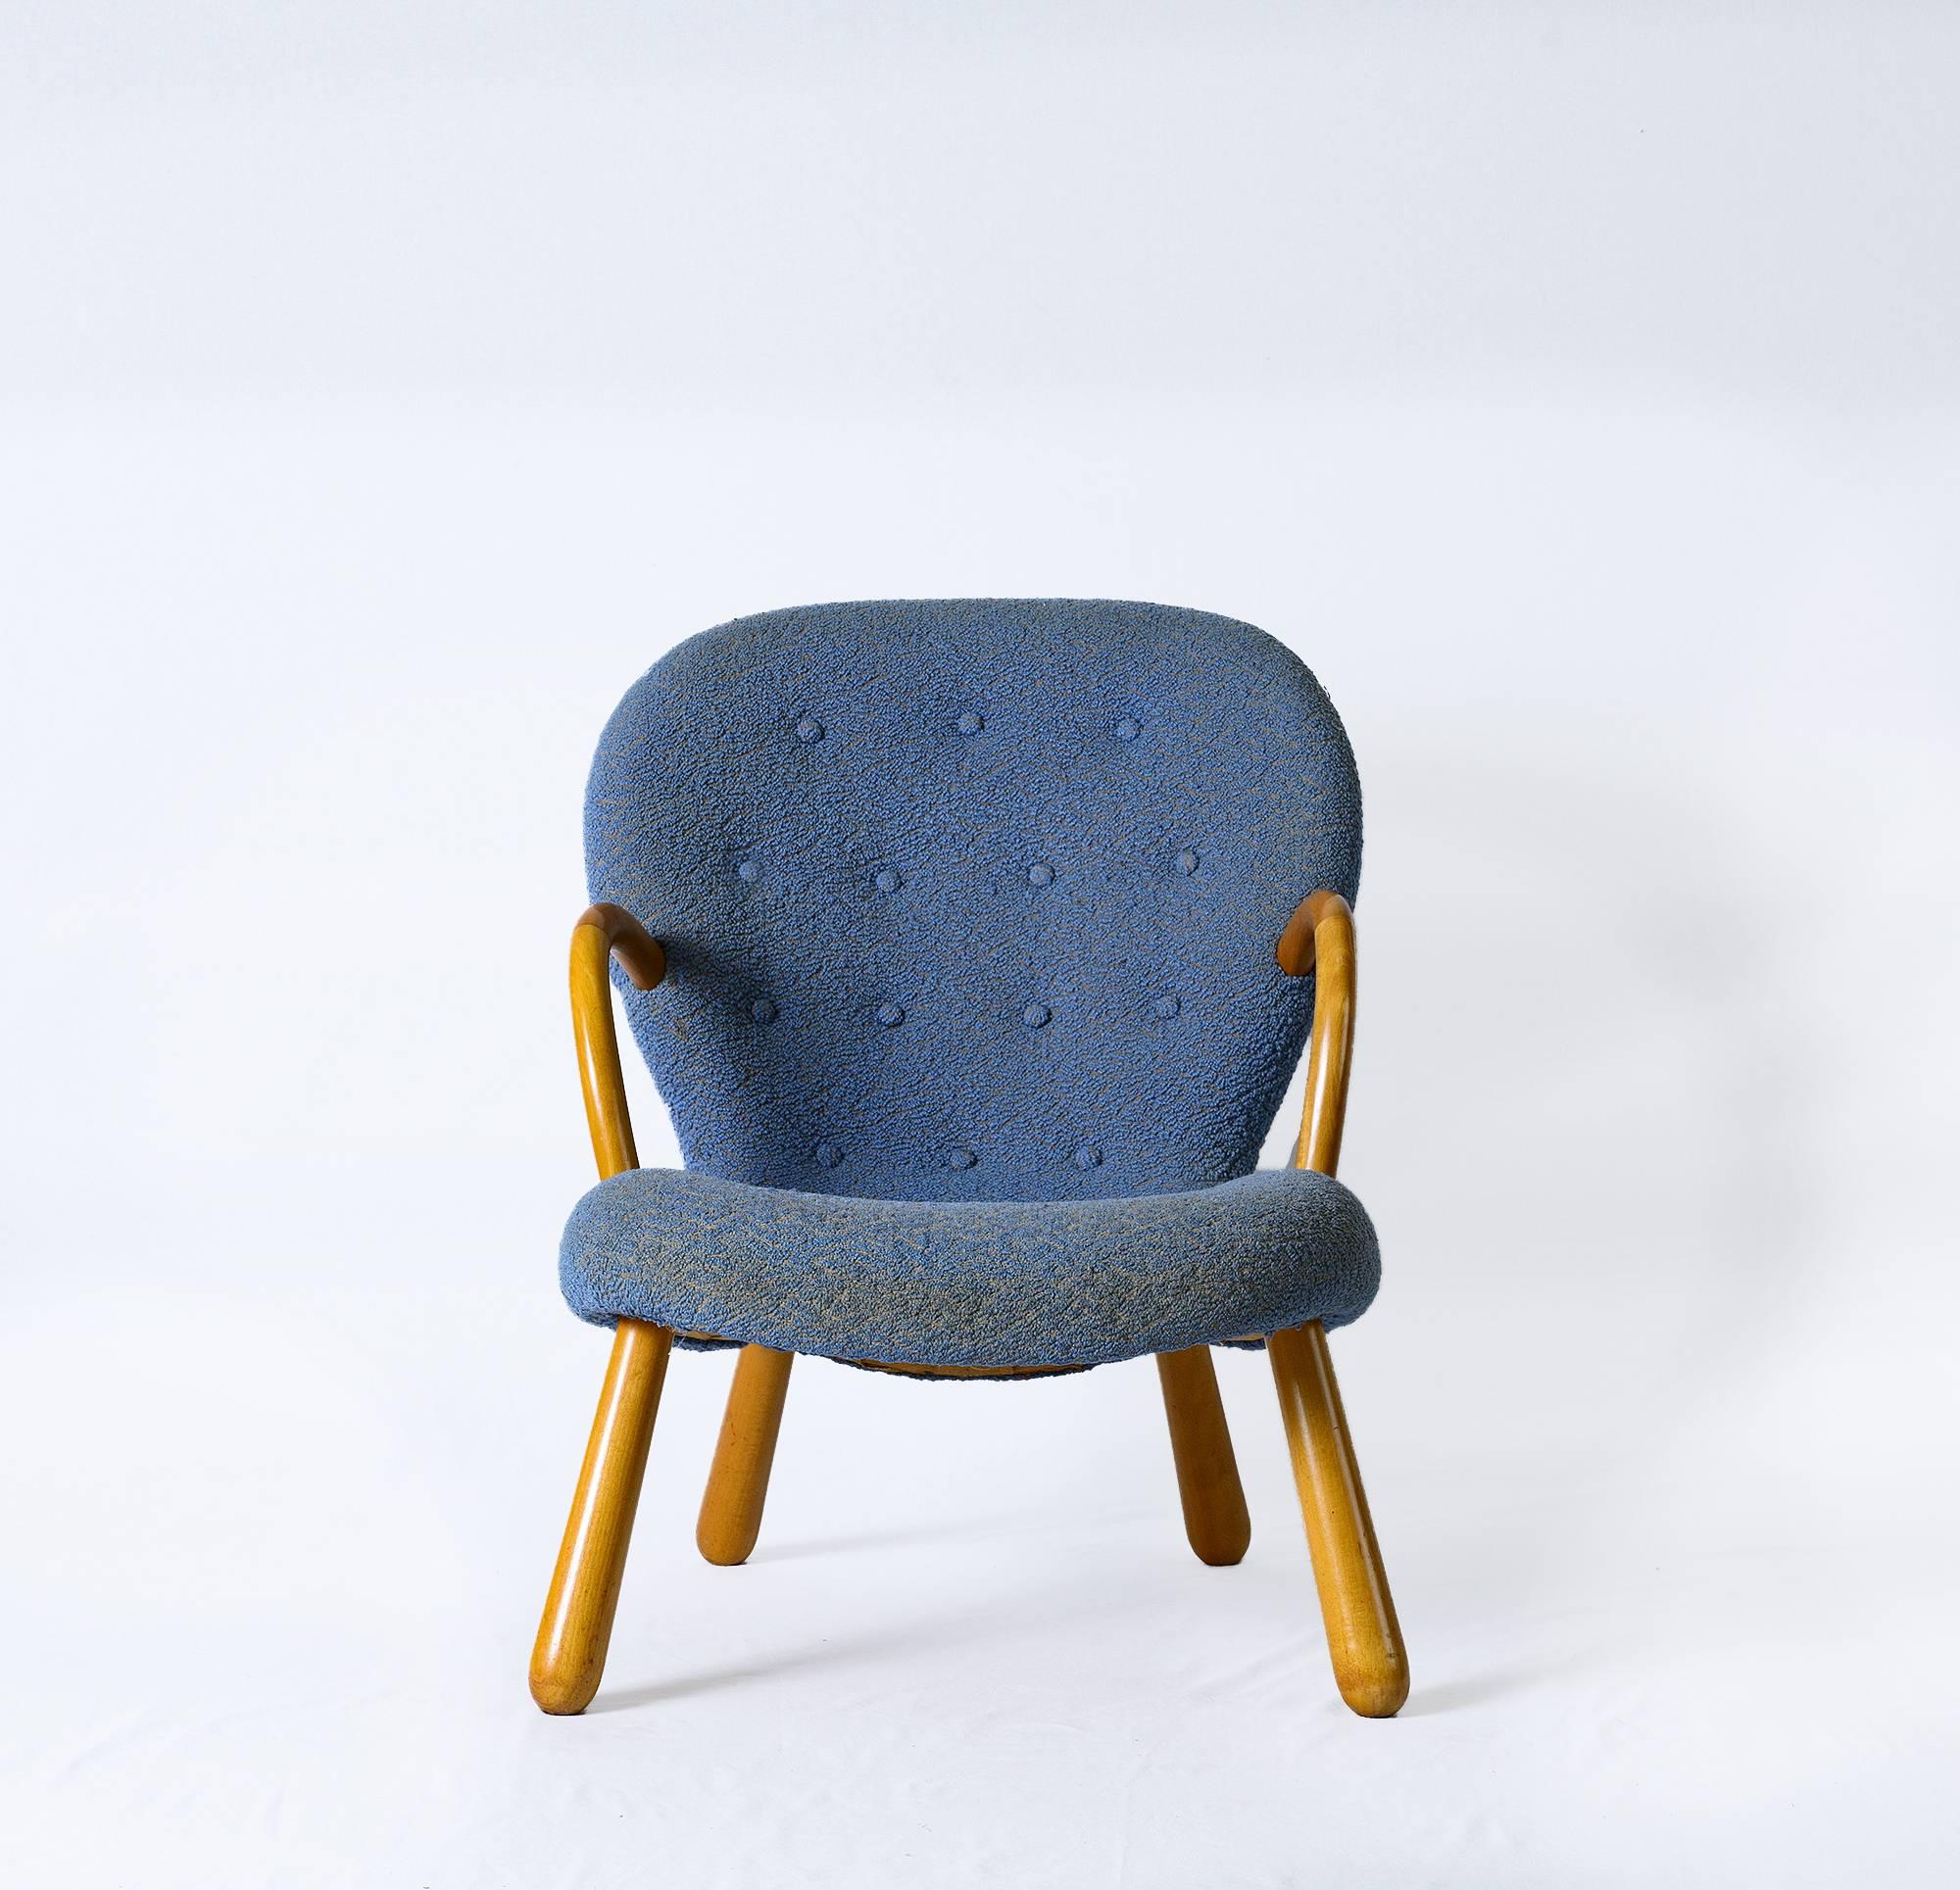 Philip Arctander "Clam" chair in the original upholstery.